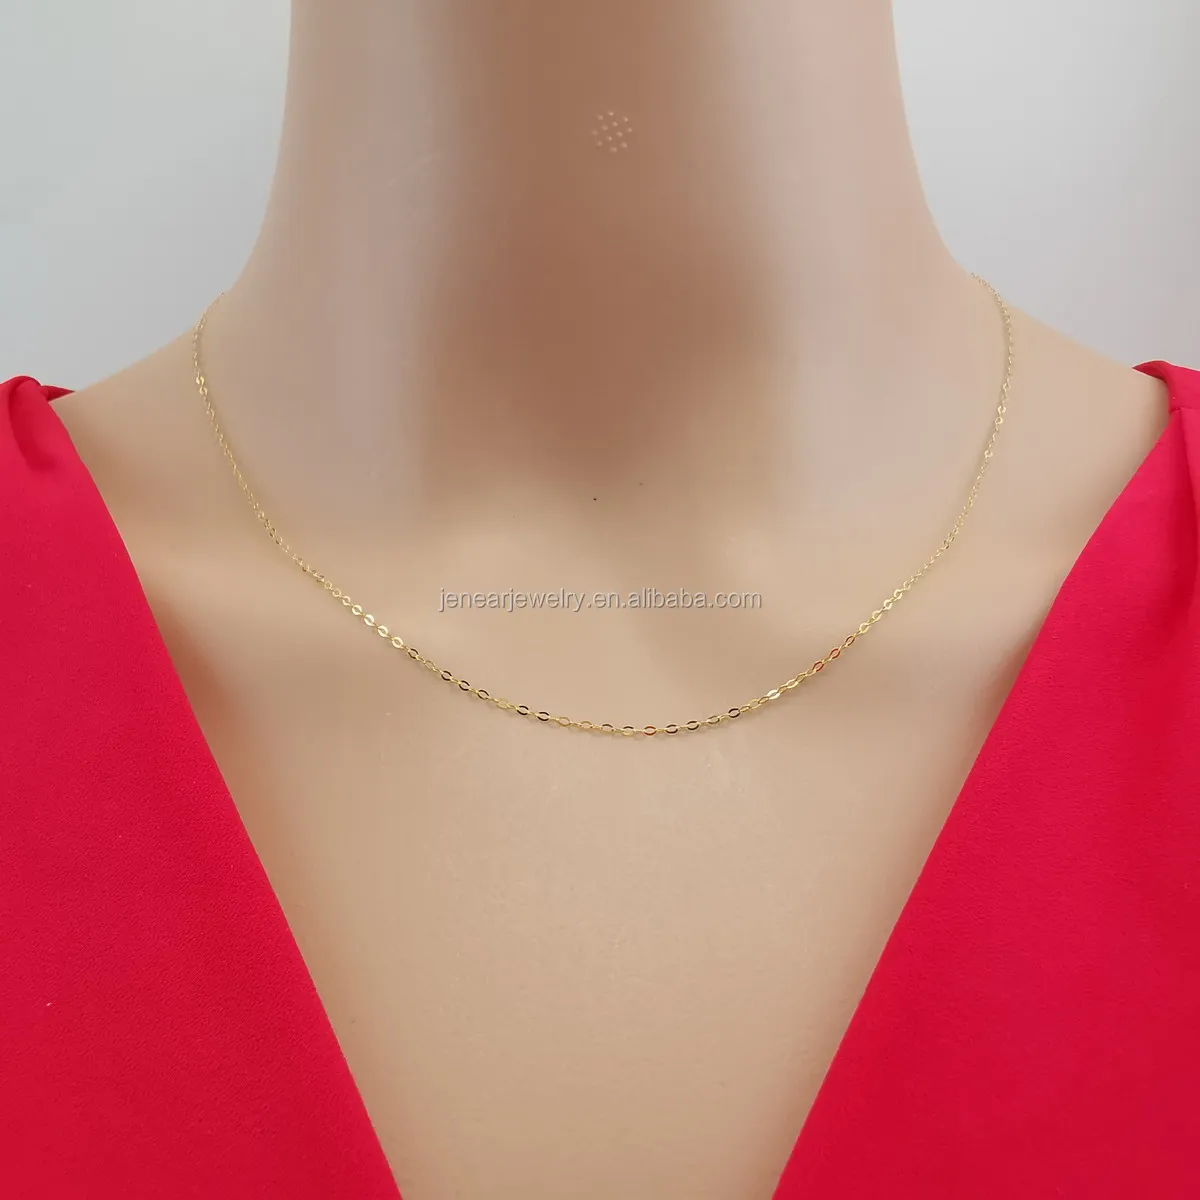 Genuine 18k Solid Real Gold Chain Necklace O Shape Cross Au750 Necklace  Fully Gold Chain - Buy Real Gold Necklace,Genuine Gold Necklace,18k Gold  Chain 